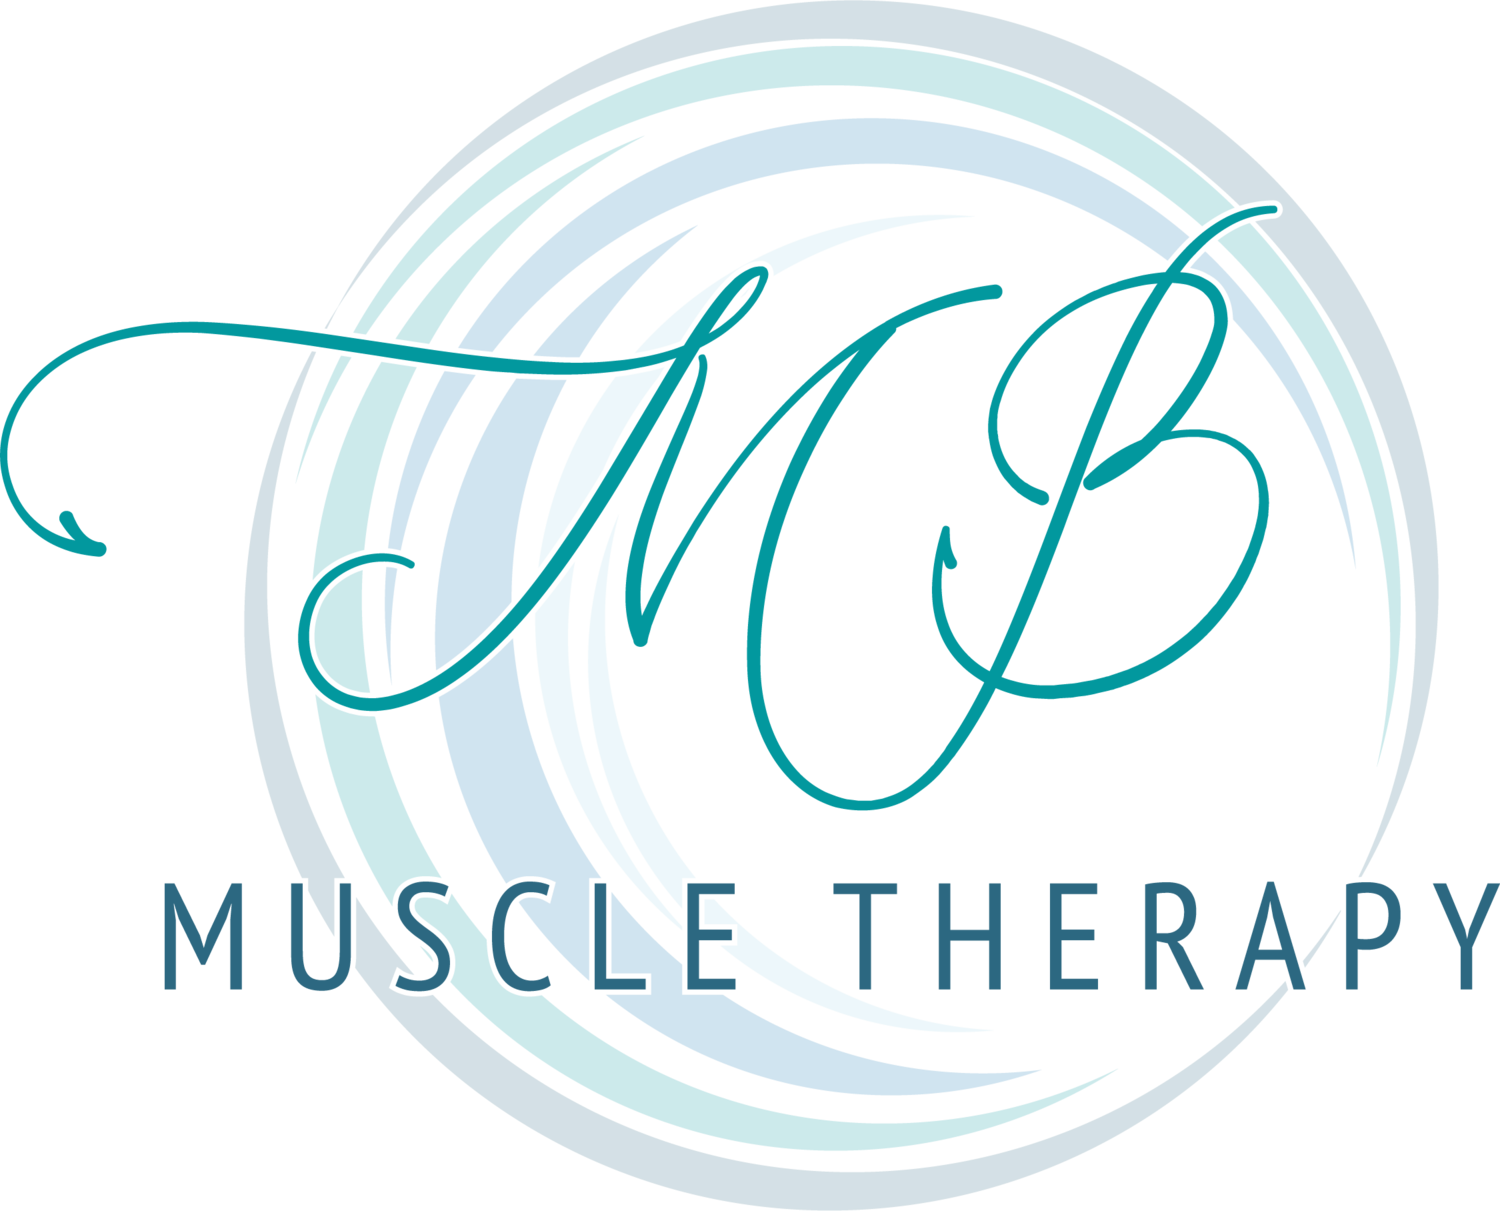 MB Muscle Therapy - Megan Gallagher